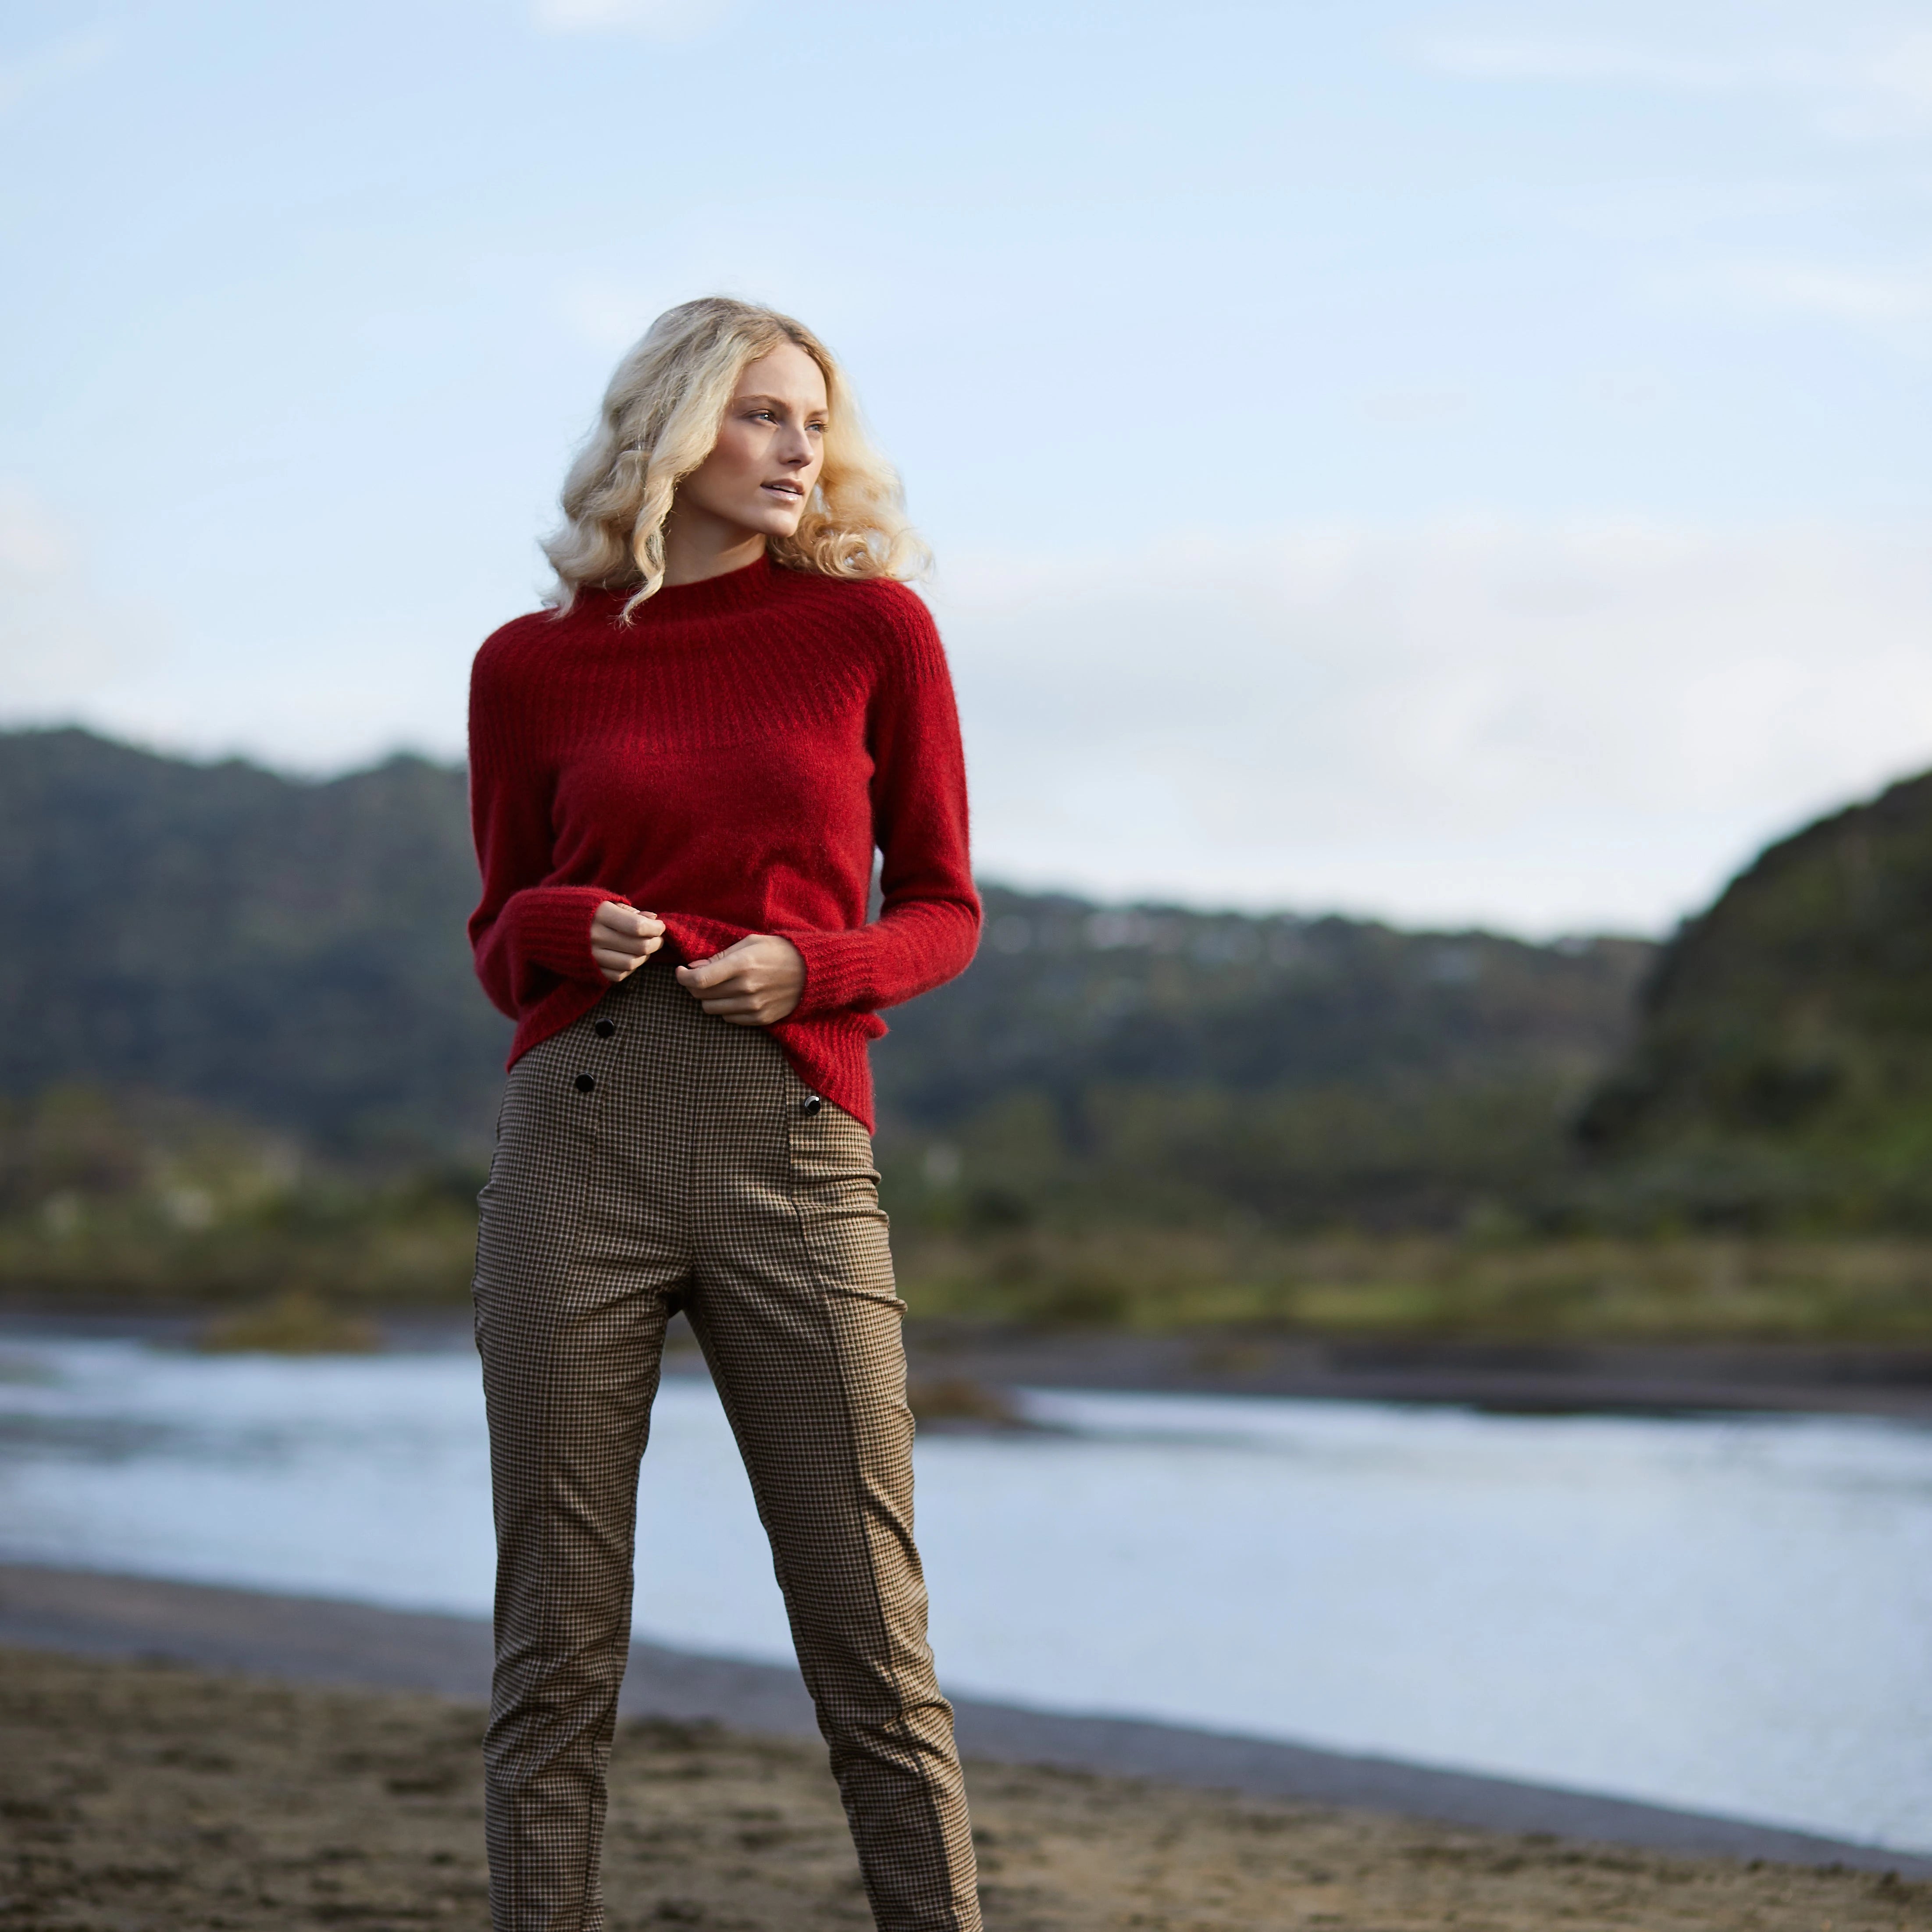 Blond woman carrying a red Merino sweater NZ produced by  MacDonald